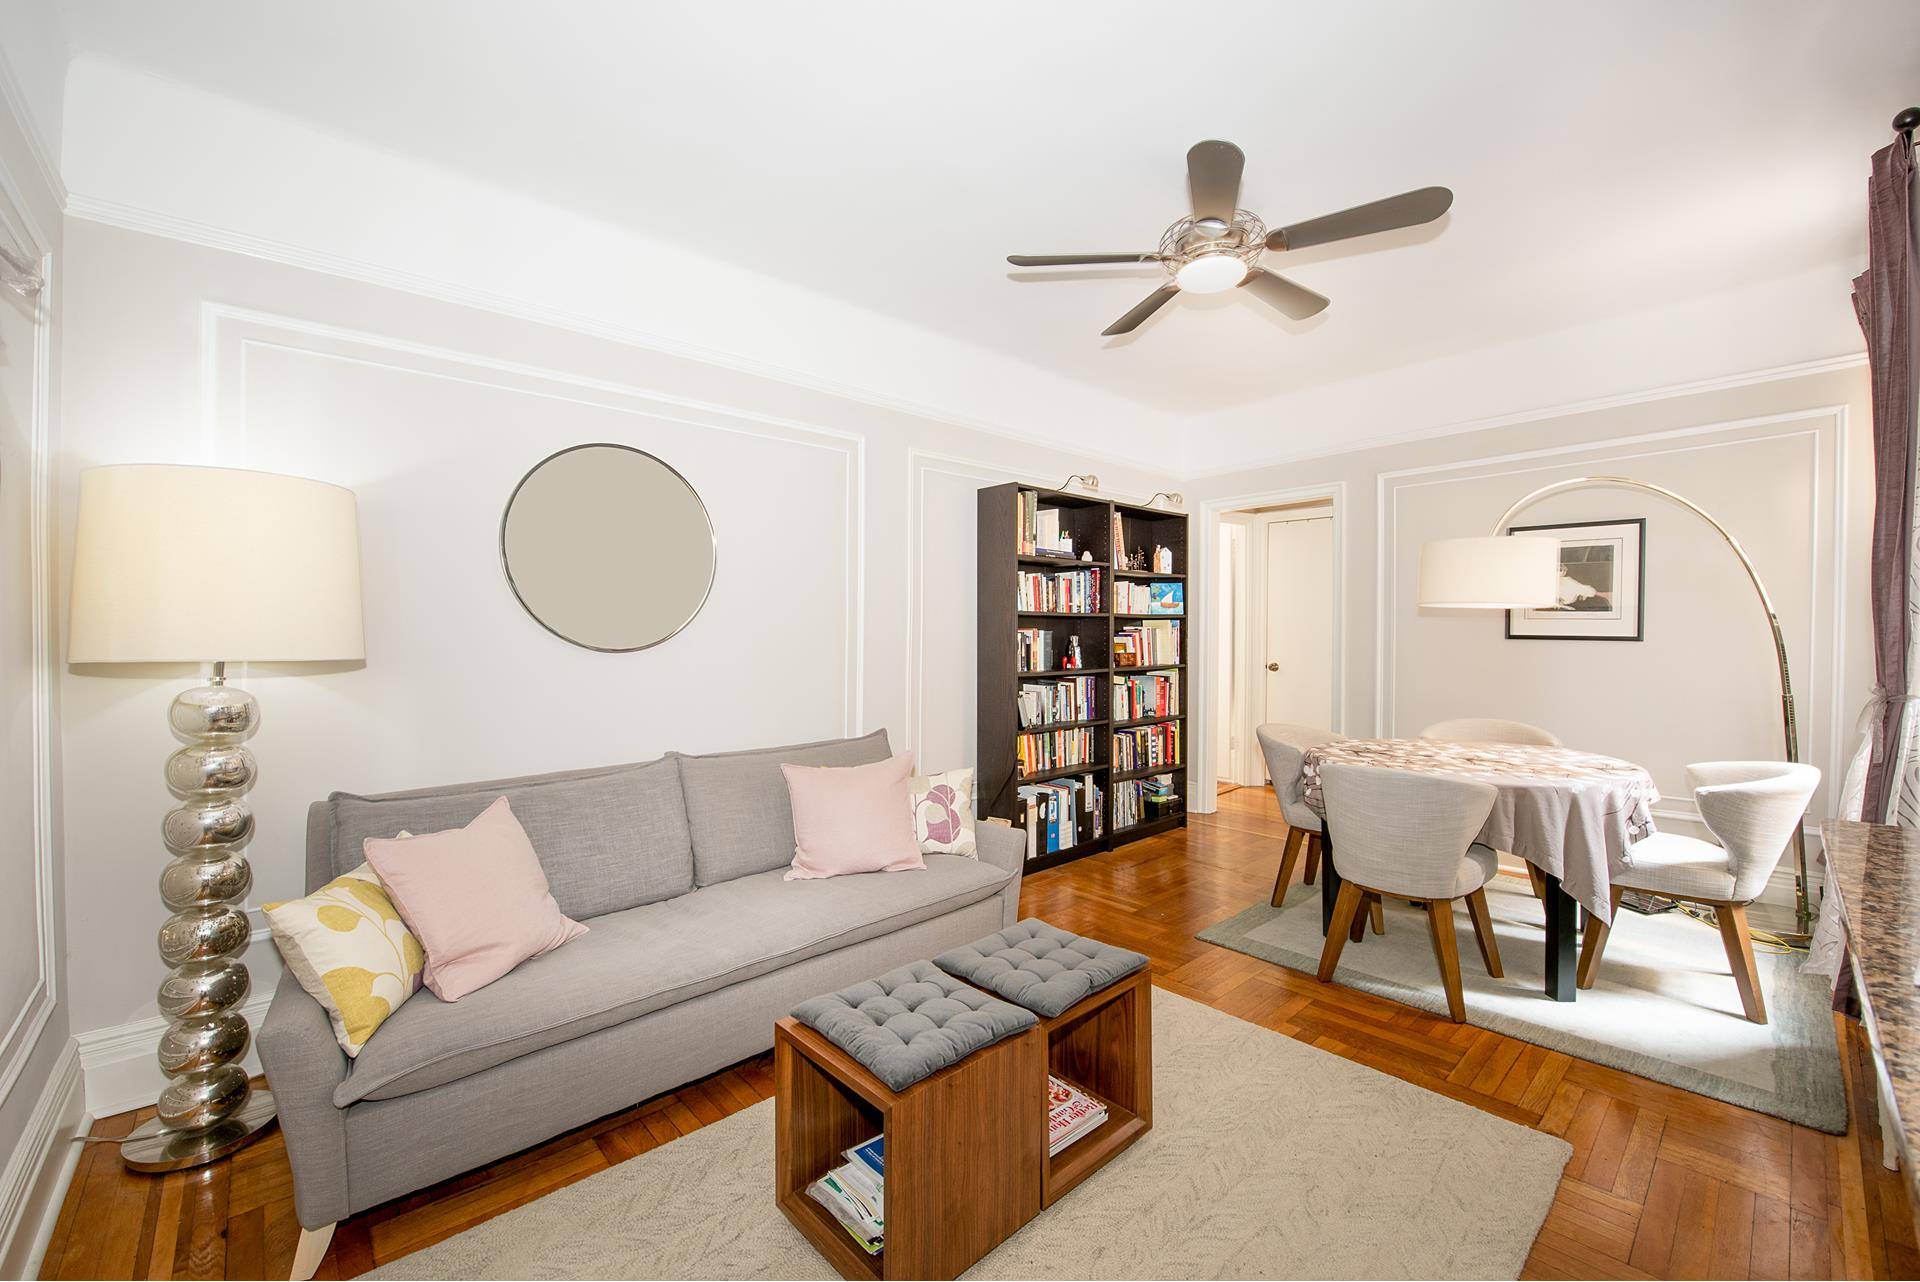 Newly renovated and restored 2 bedroom home with stunning prewar details.